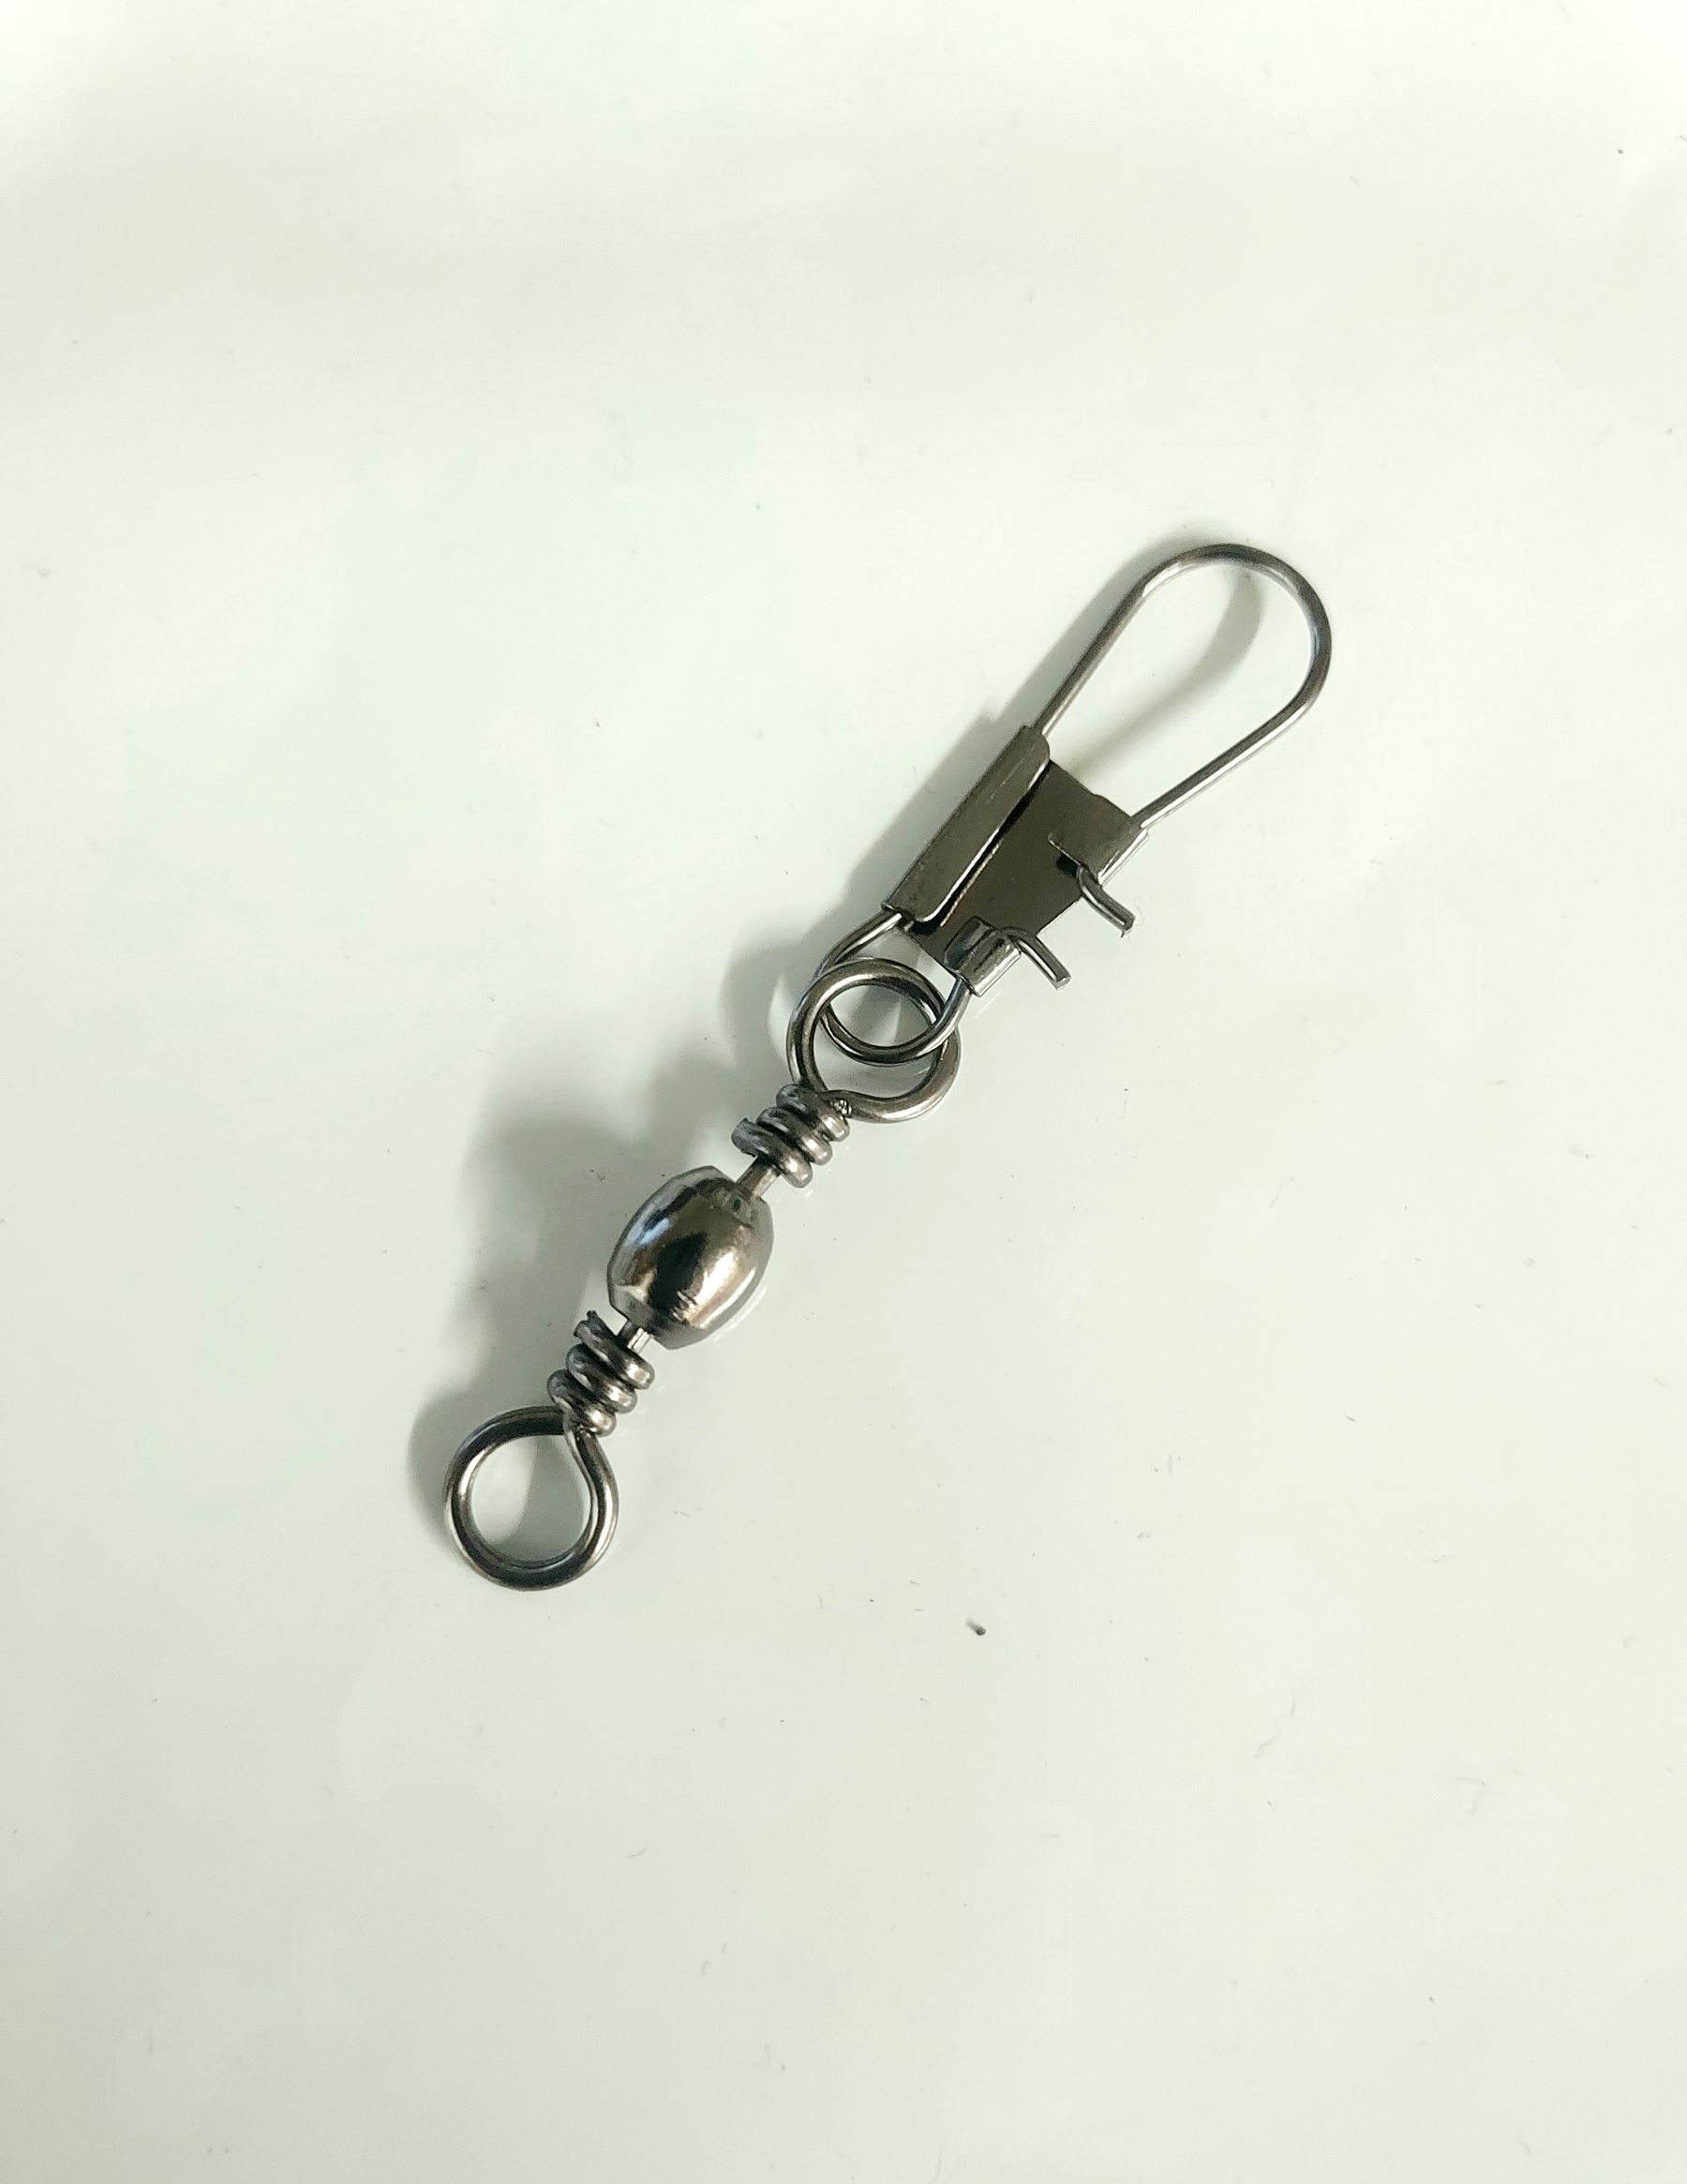 Ball bearing snap swivel. Helps save you from line twist. - Get Hooked  Magic Baits